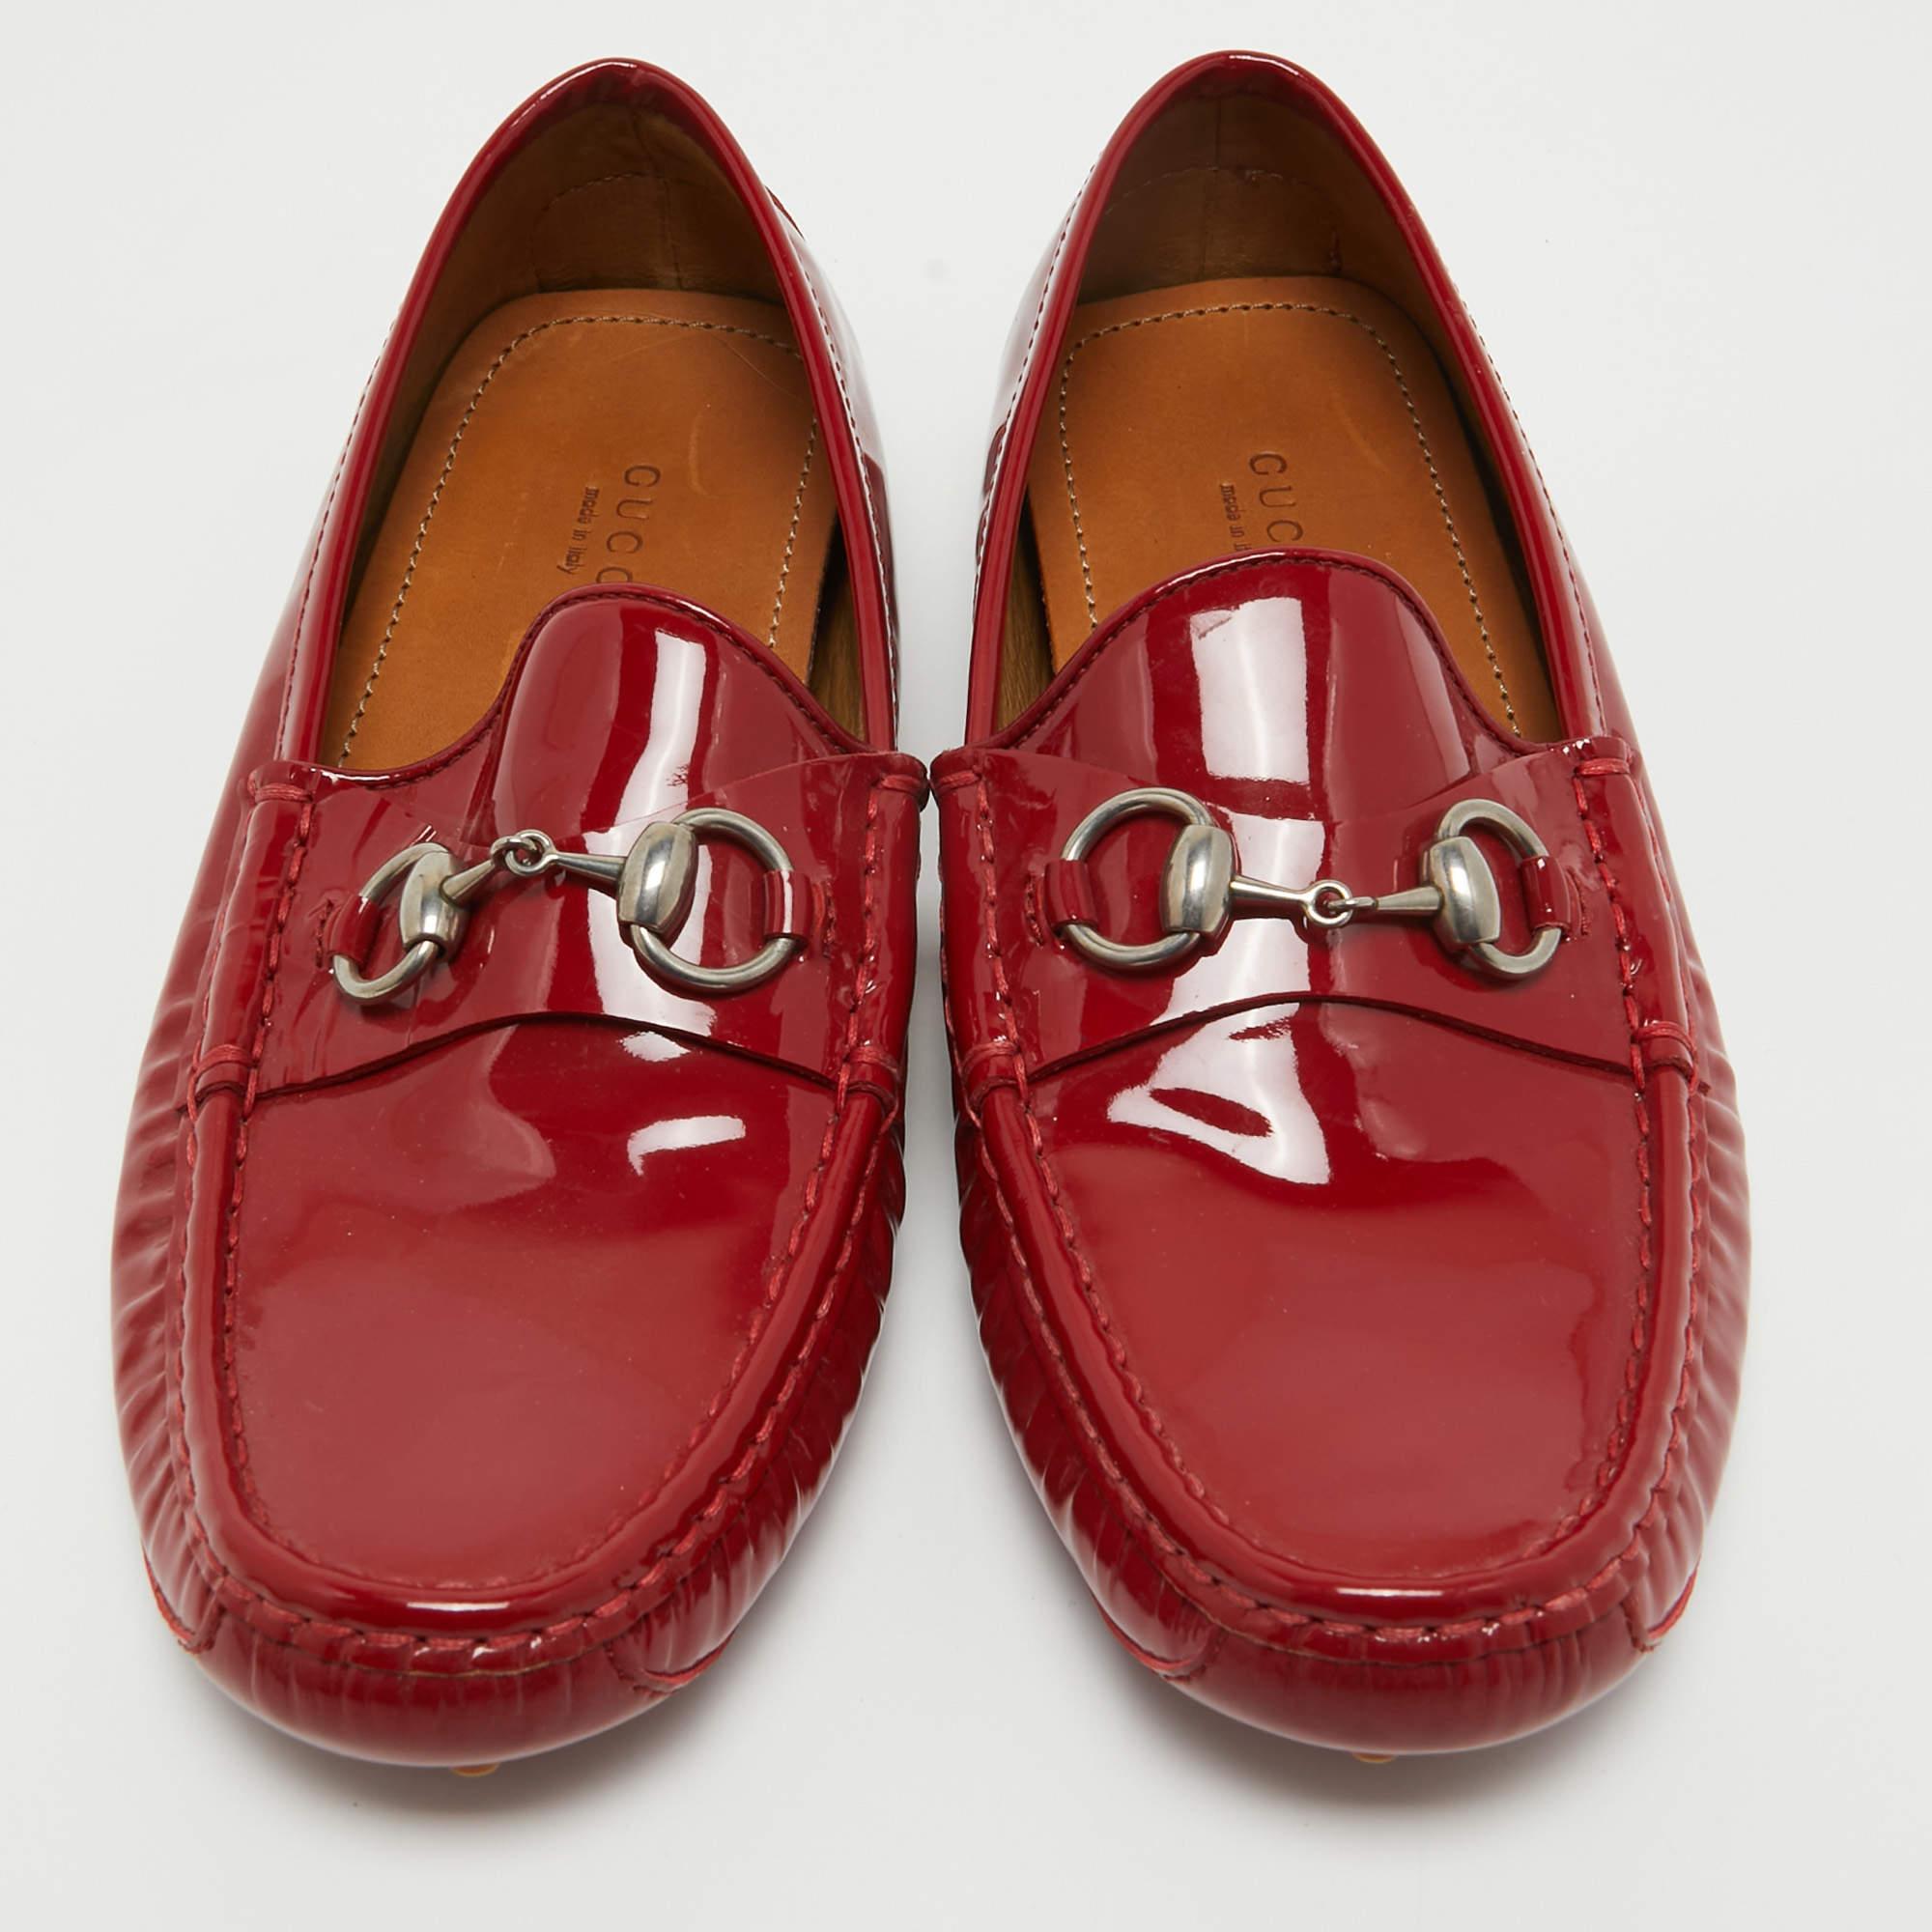 Gucci Red Patent Leather Horsebit Slip On Loafers Size 38 In Excellent Condition For Sale In Dubai, Al Qouz 2